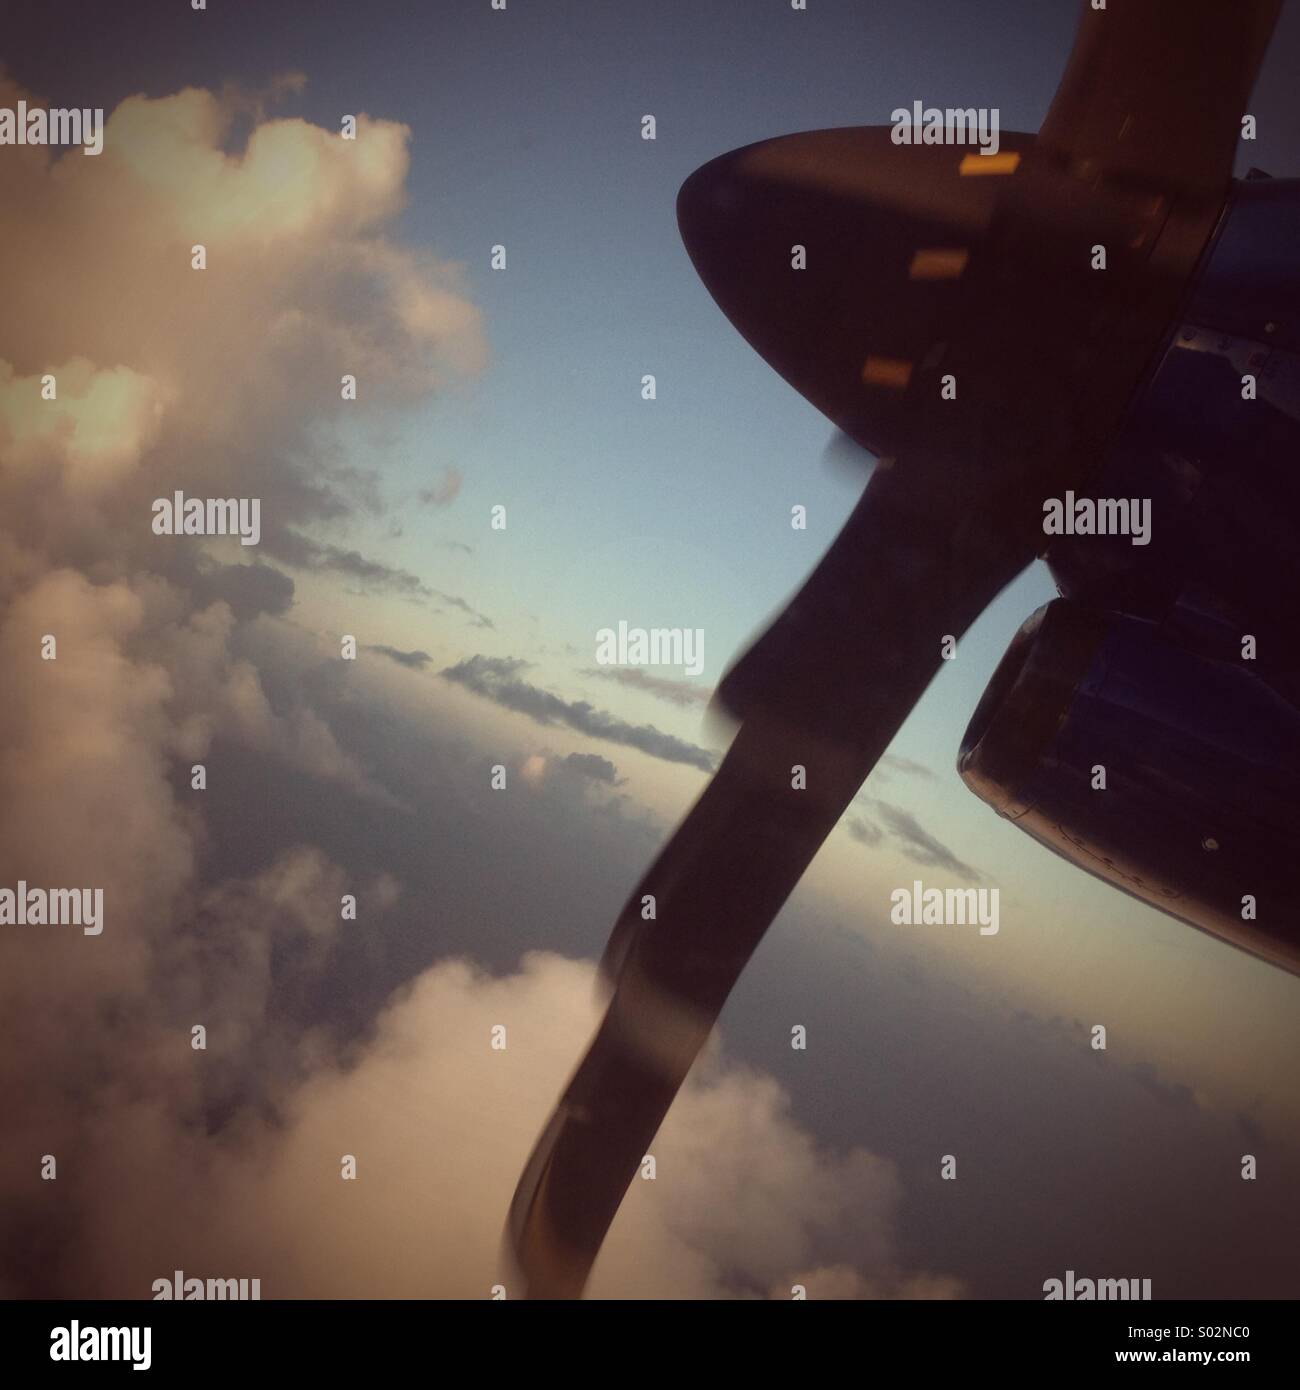 Plane in the sky, clouds and propellers Stock Photo